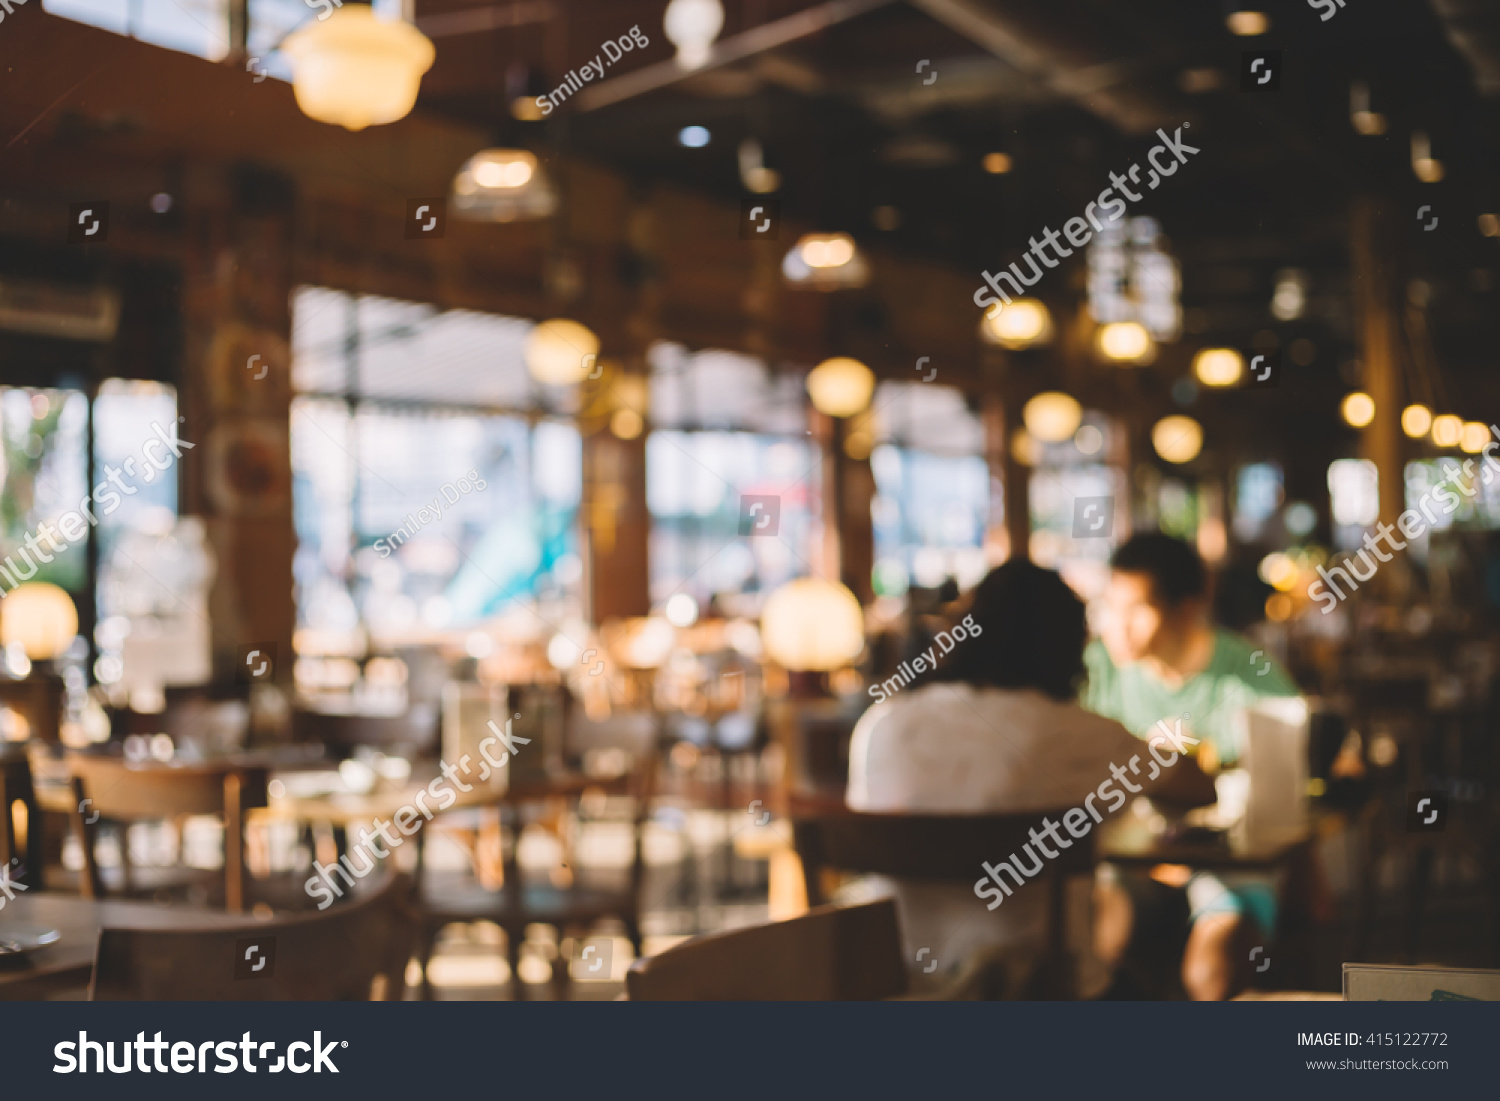 Blurred background of restaurant with people. #415122772